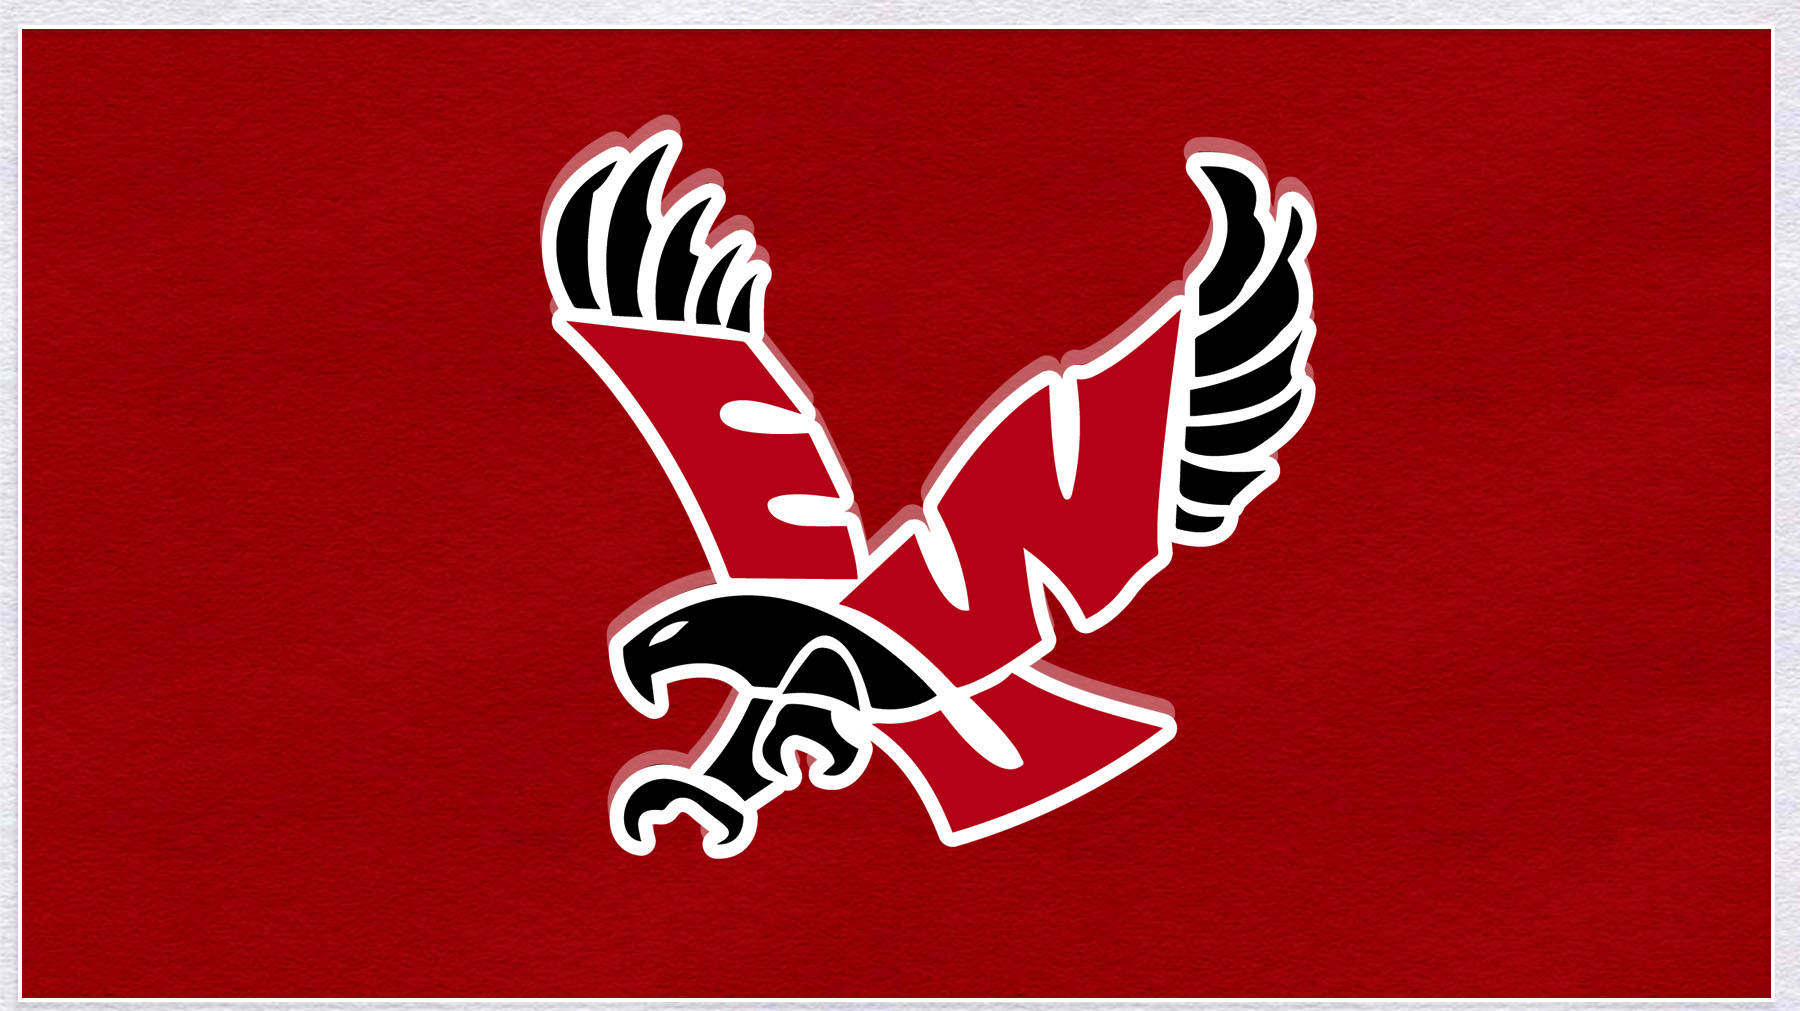 Exciting Updates for Eastern Washington Basketball Staff Featuring Ryan Lundgren, Larry Anderson, and Ben Beauchamp